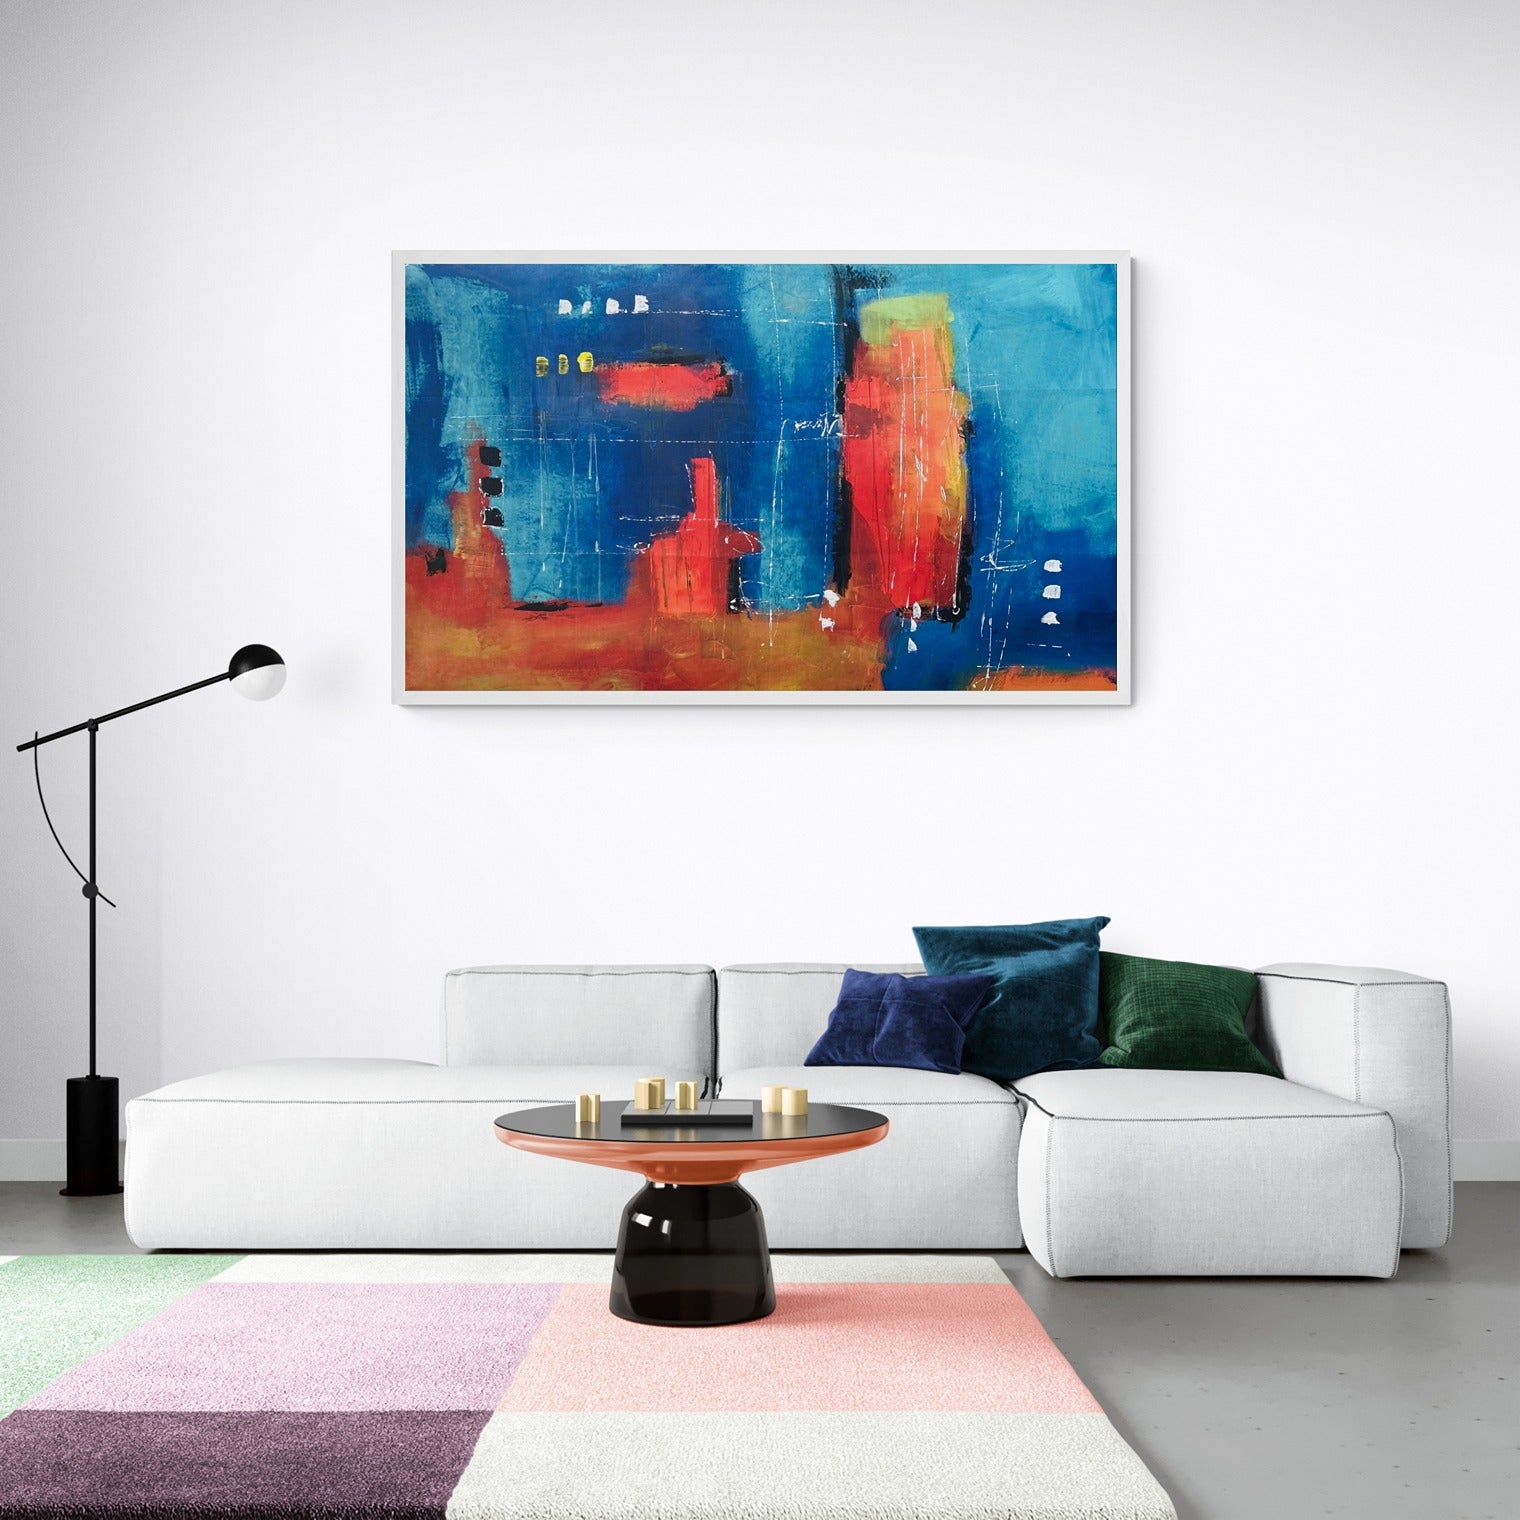 Discover large, affordable wall art for your modern living room, perfectly complementing the spaciousness and vibrancy of your decor, including a large, colorful rug.